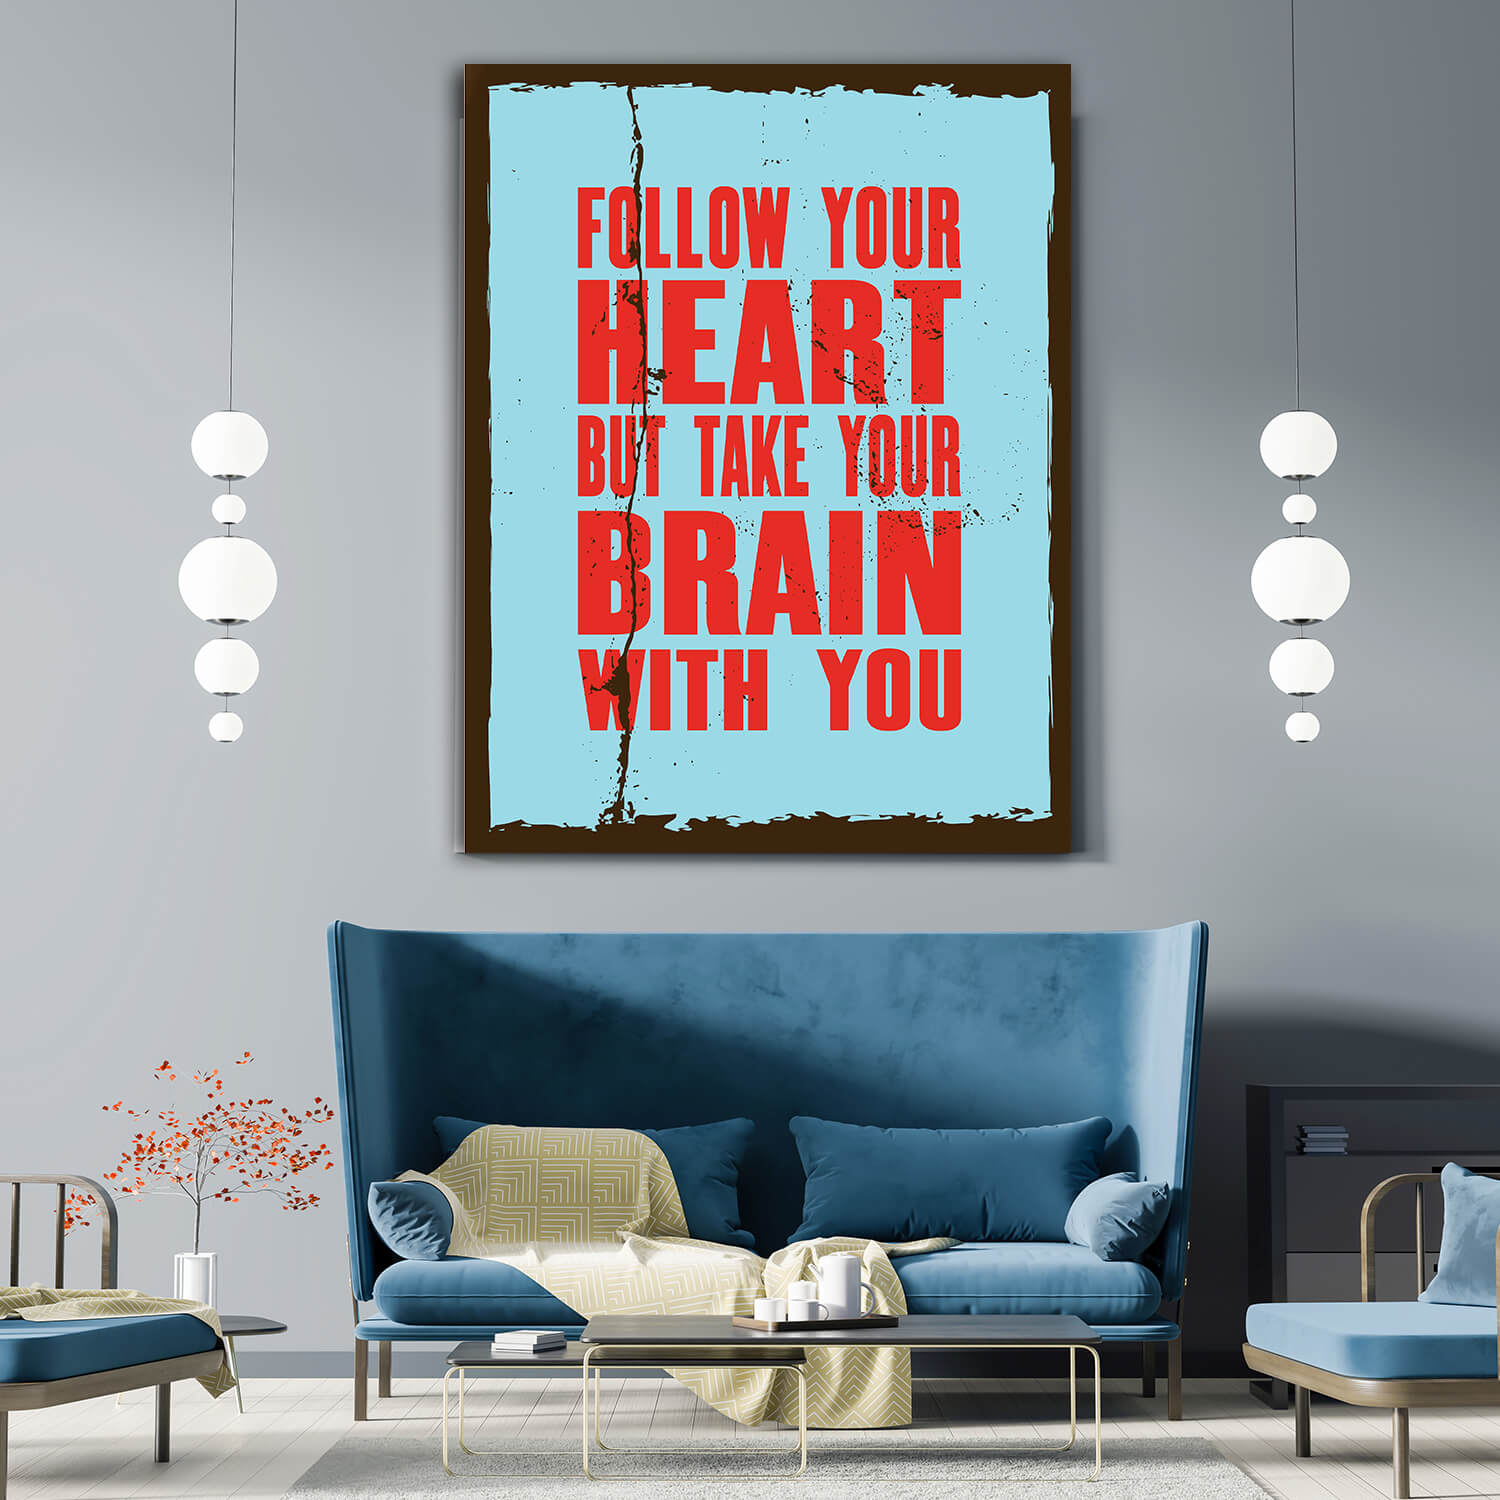 W1_0012_M&P_0020_PRINT__0012_32765910_ FOLLOW YOUR HEART BUT TAKE YOUR BRAIN WITH YOU AOA10843